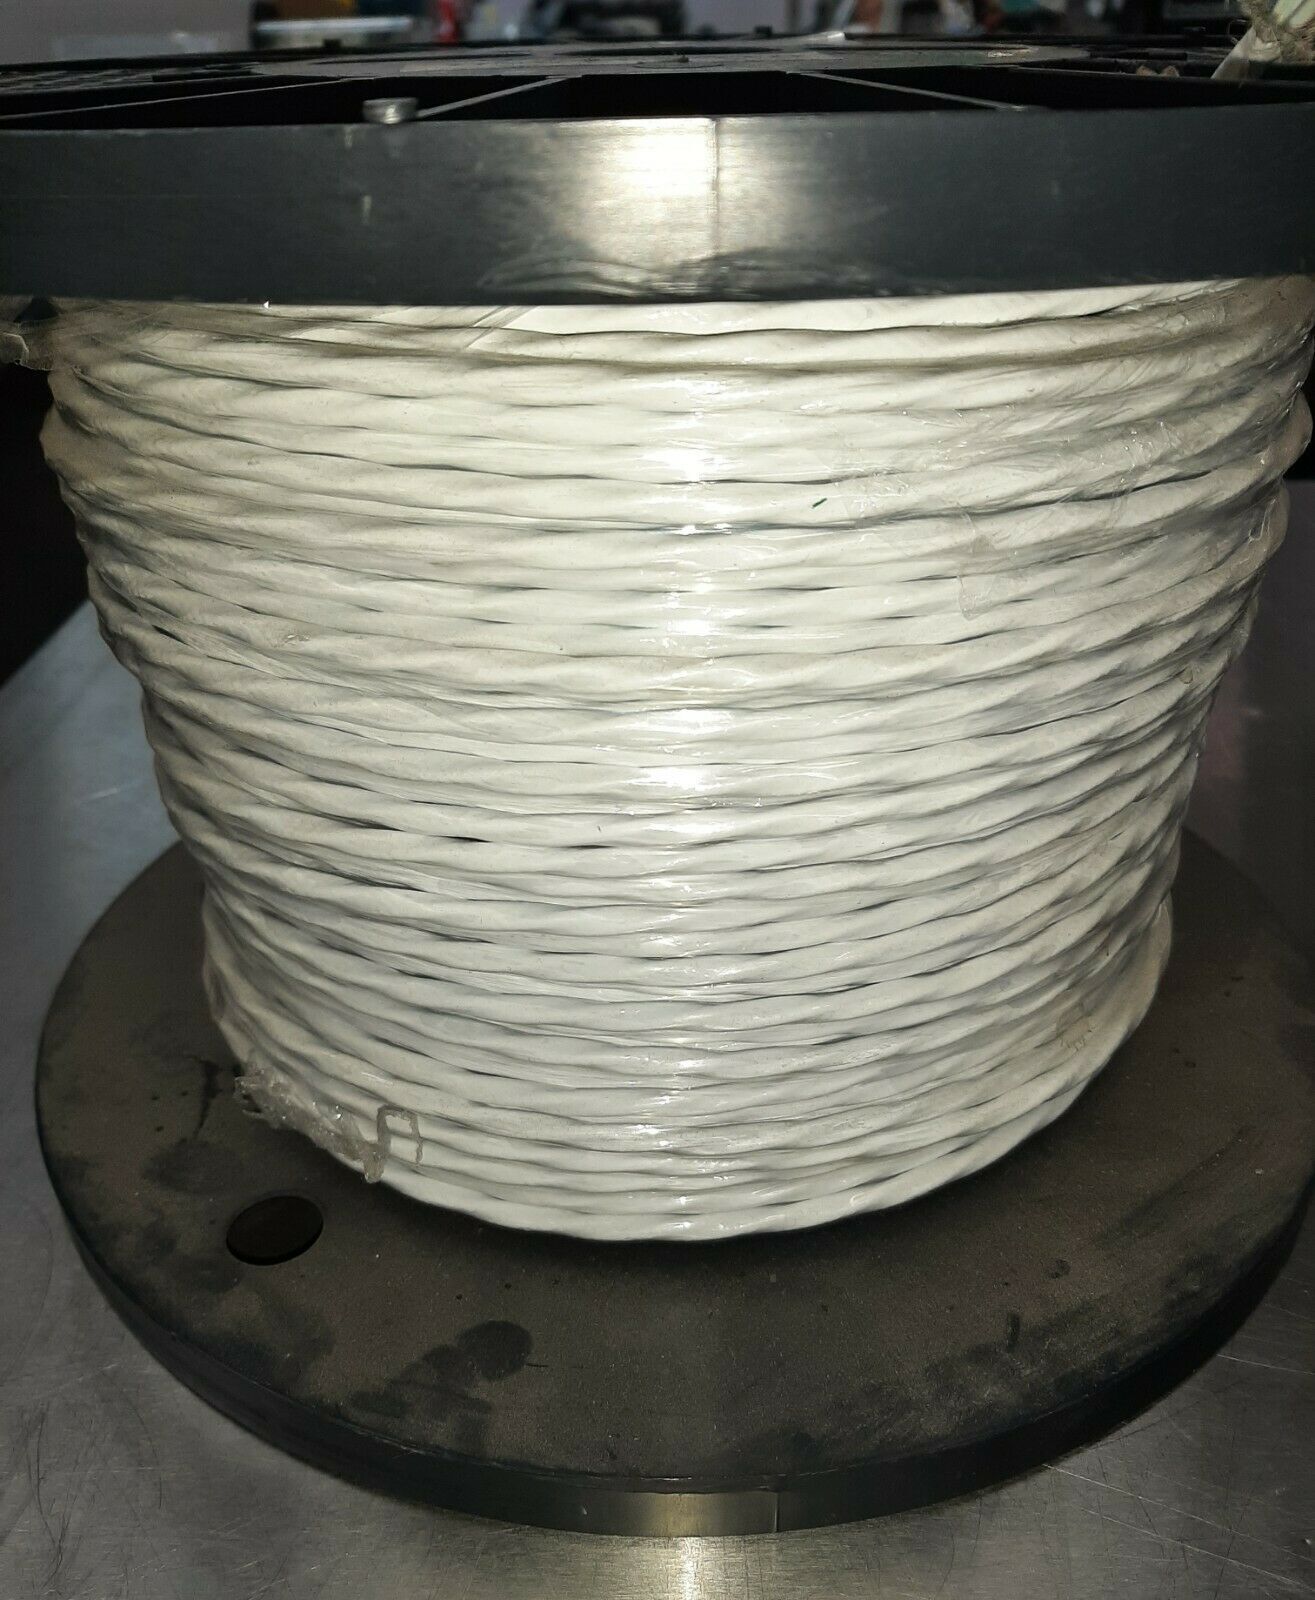 M27500-16SD3U23 AEROSPACE AIRCRAFT AIRFRAME WIRE 16 AWG 3 CONDUCTOR 10 Ft.